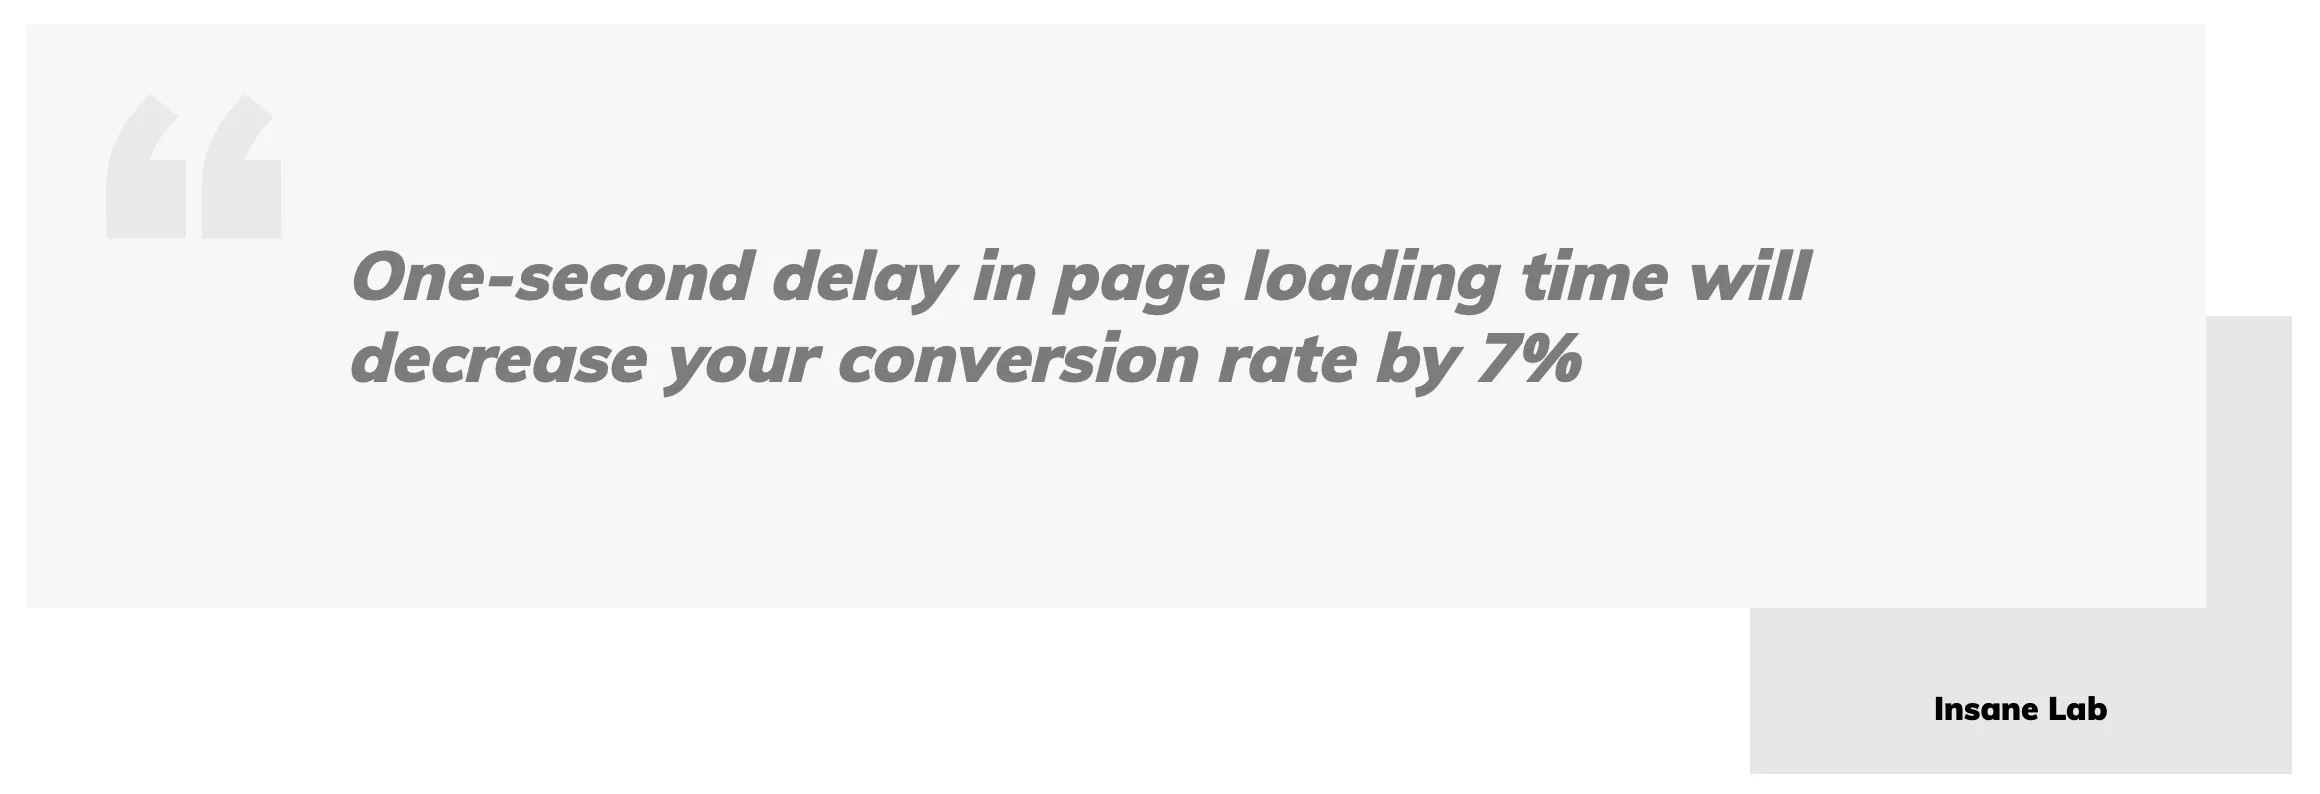 How page loading speed affects conversion -- the longer you load, the lower your website converts